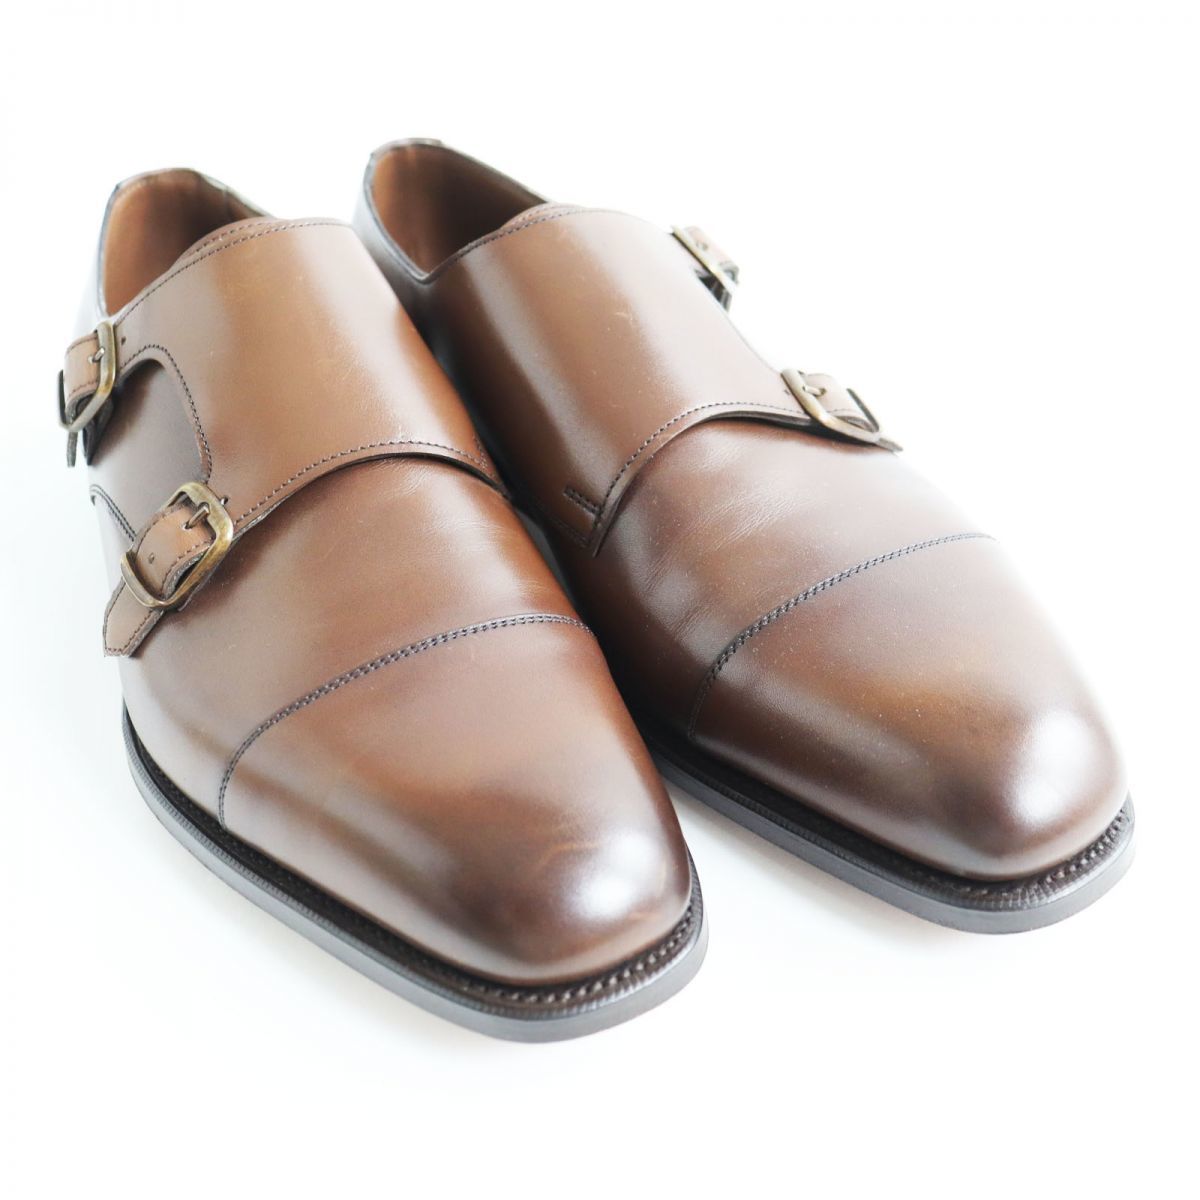  unused * Edward Green WESTMINSTER 808 last strut chip double monk strap leather shoes dark brown 6 1/2 box attaching 